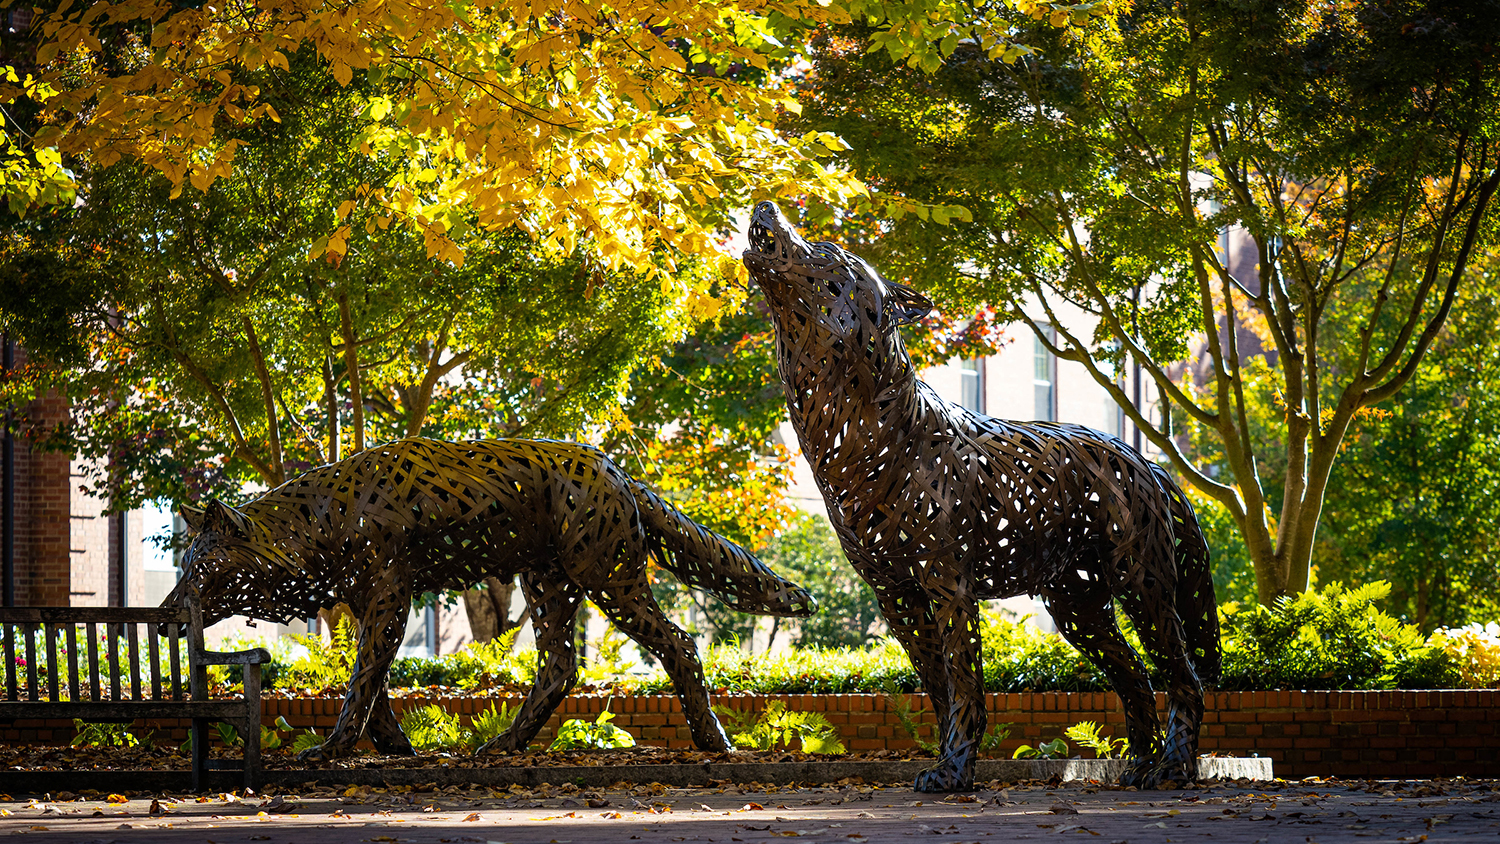 Wolf Plaza during fall. Two bronze sculptures of wolves, one head down, the other howling.